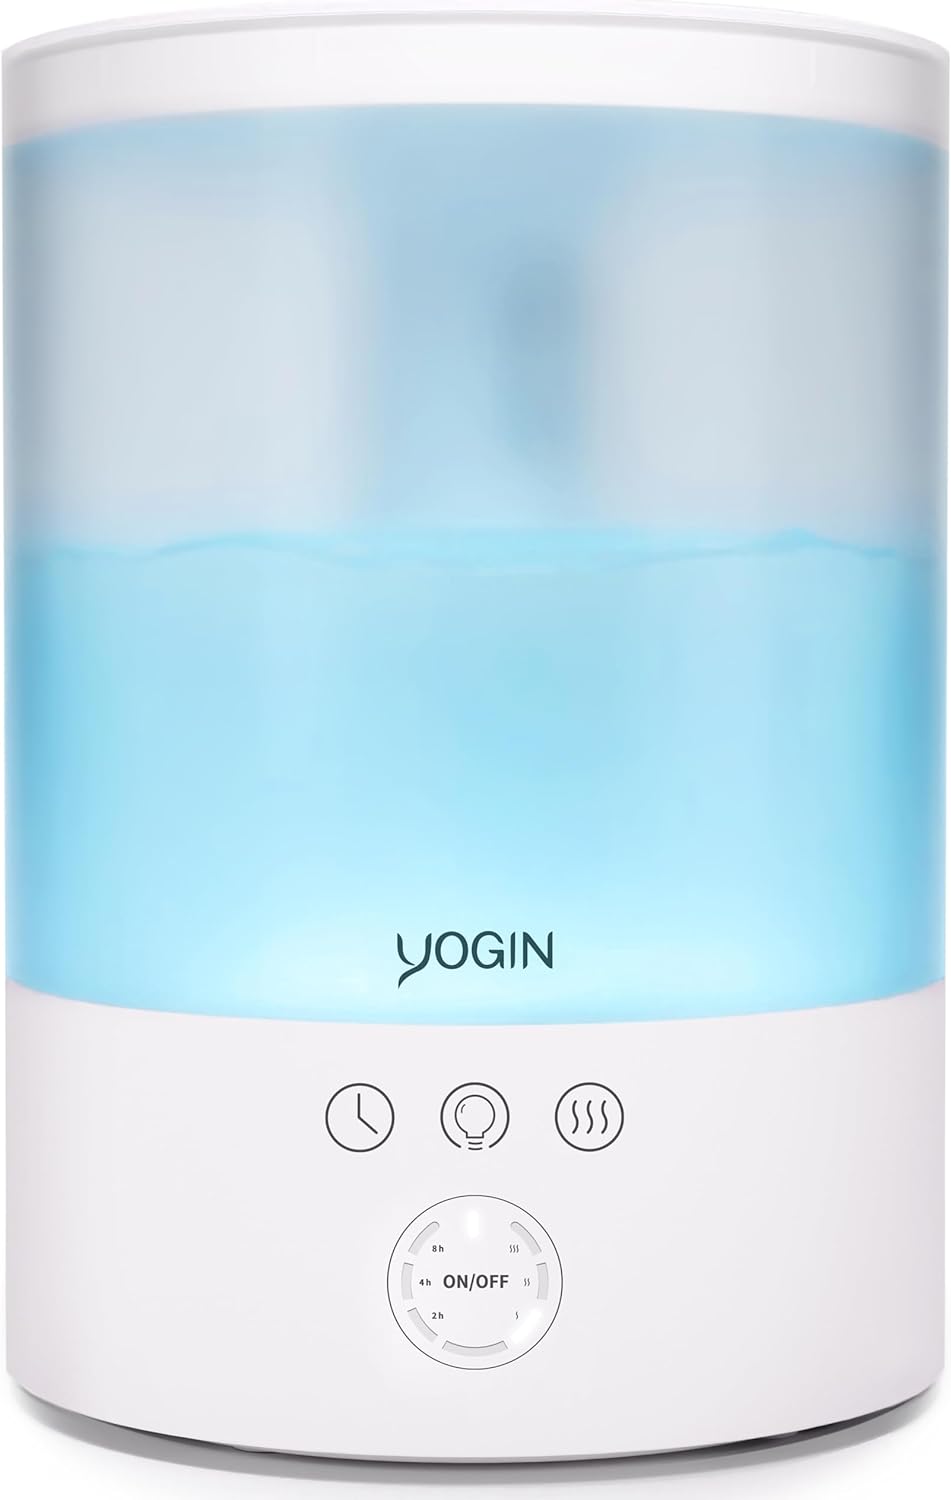 Humidifiers for Bedroom Large room,Top fill 2.5L Ultrasonic cool mist Humidifiers for Baby Nursery and Plants,Up to 24 Hours, 24db Quiet,Night Light, Auto Shut Off, Easy Clean Humidifier